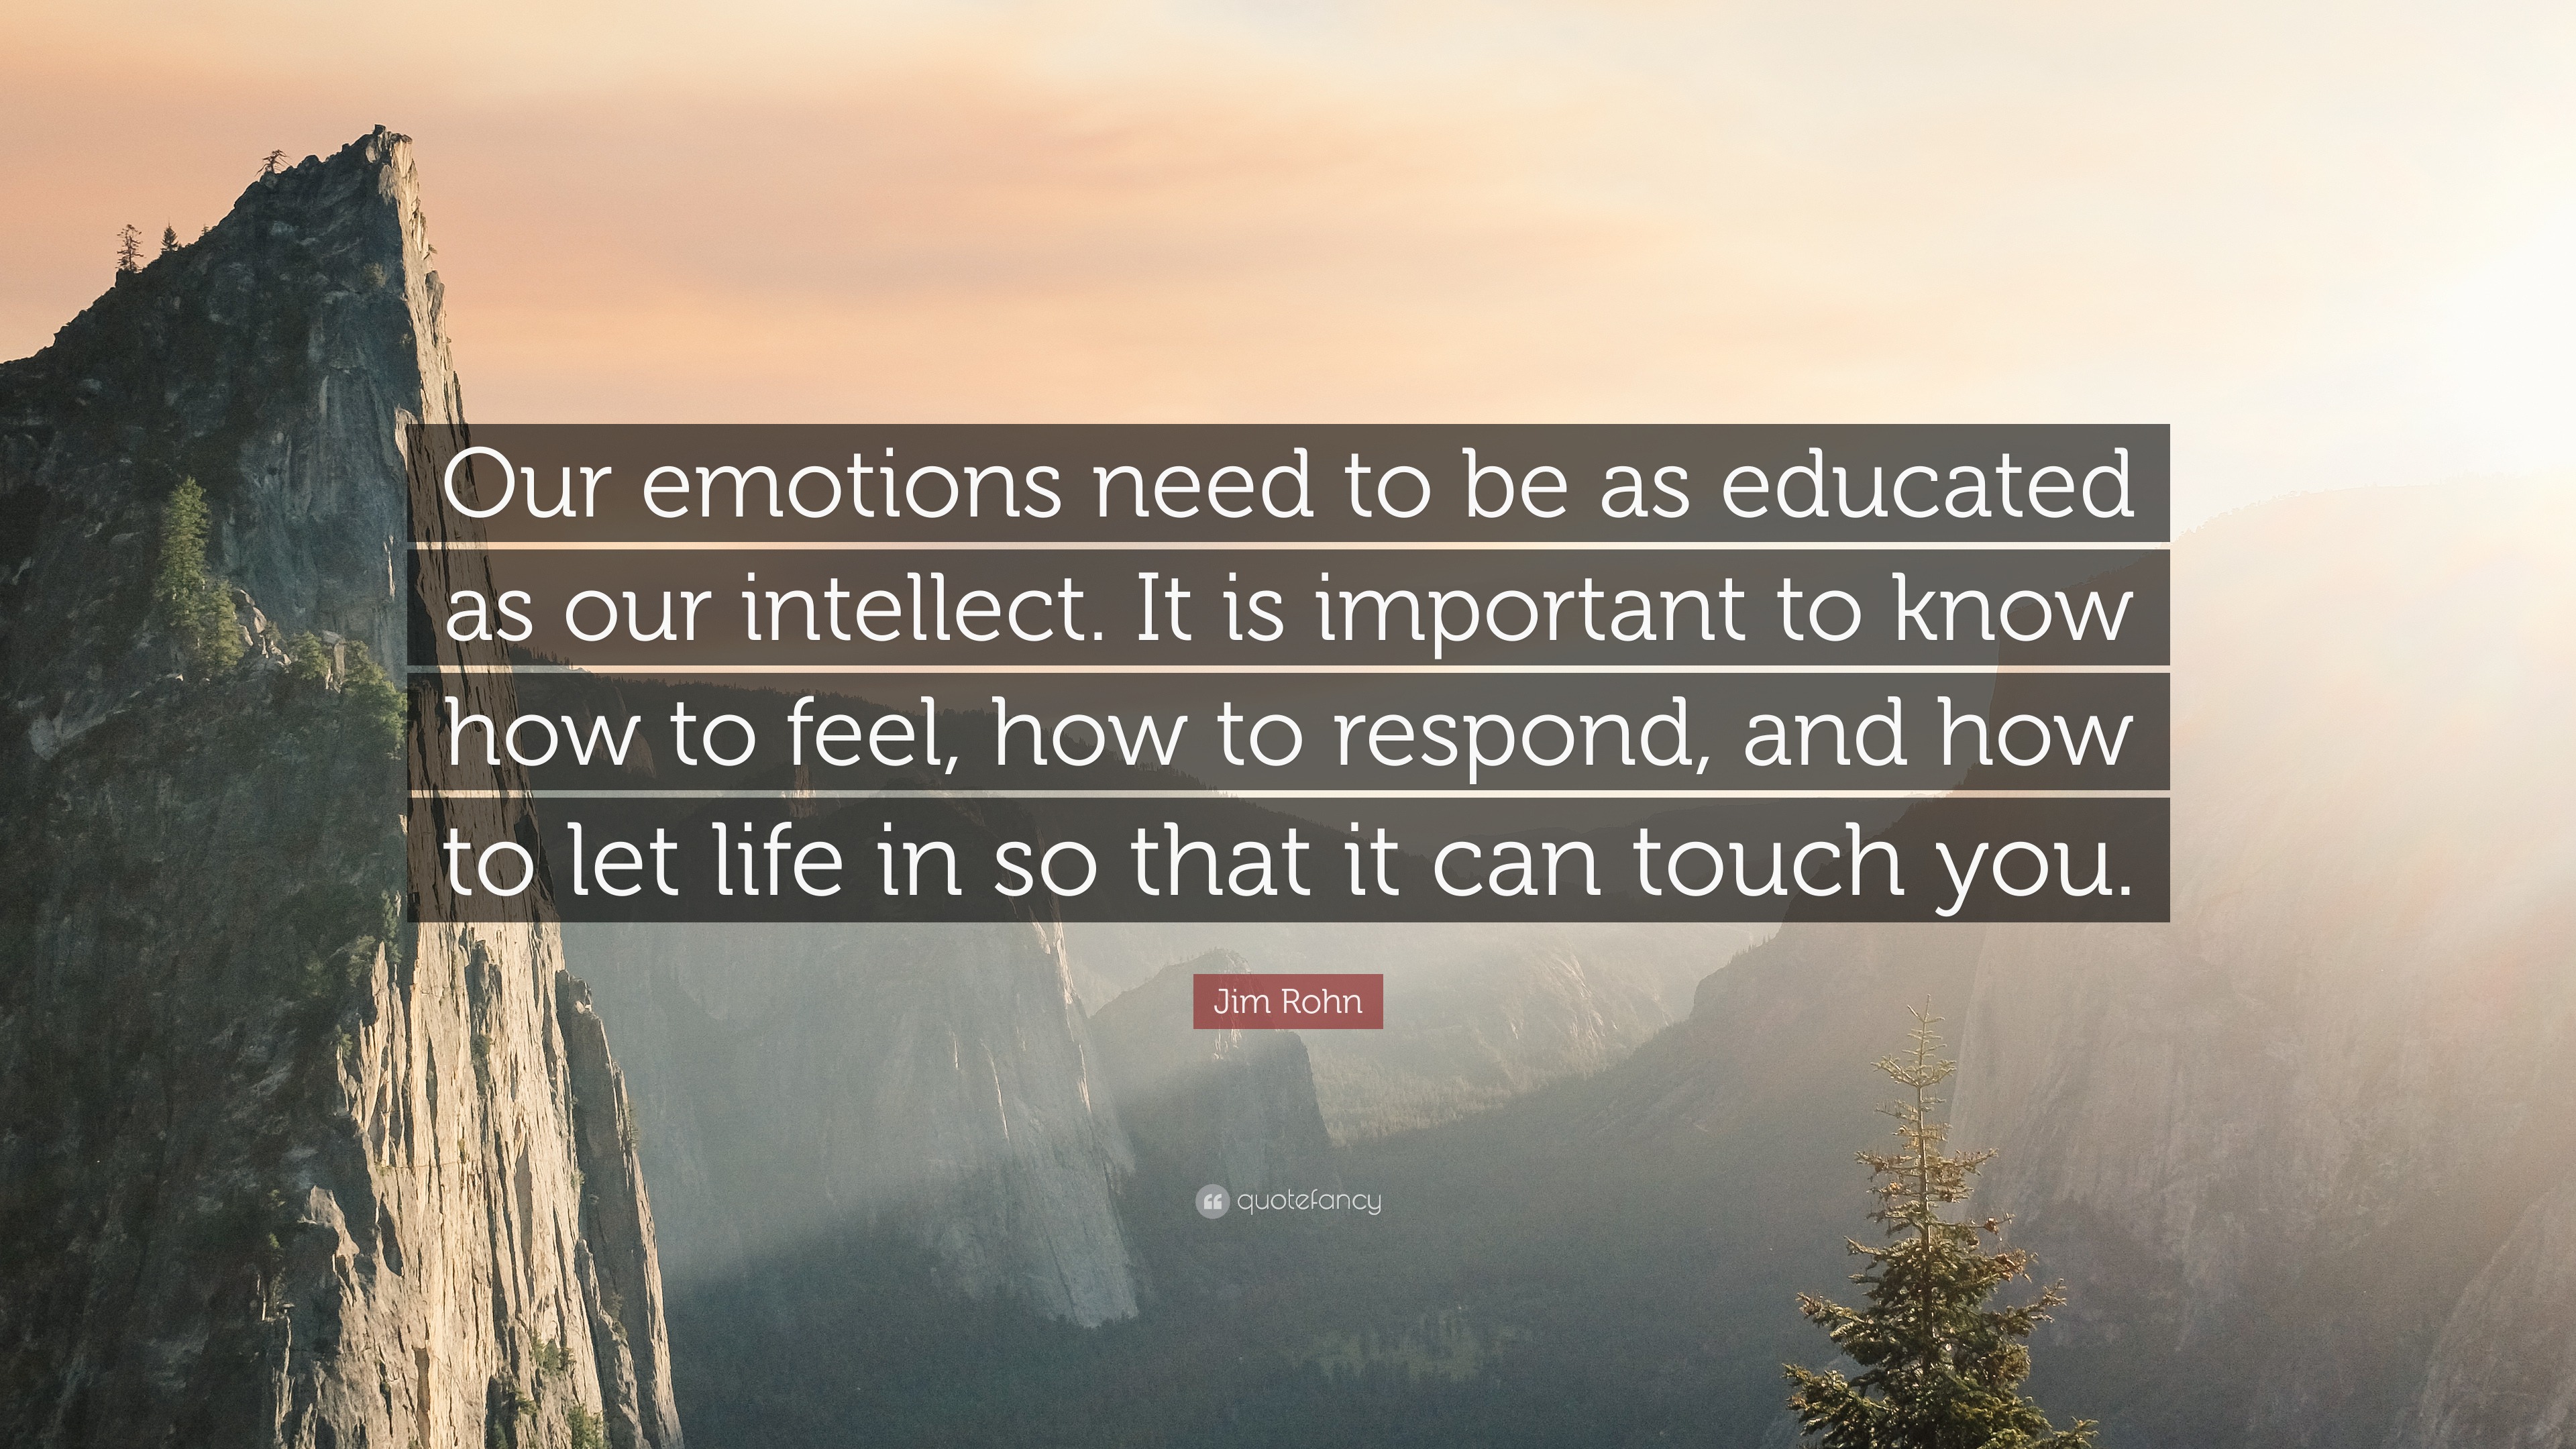 How Emotions Can Be As Educated As